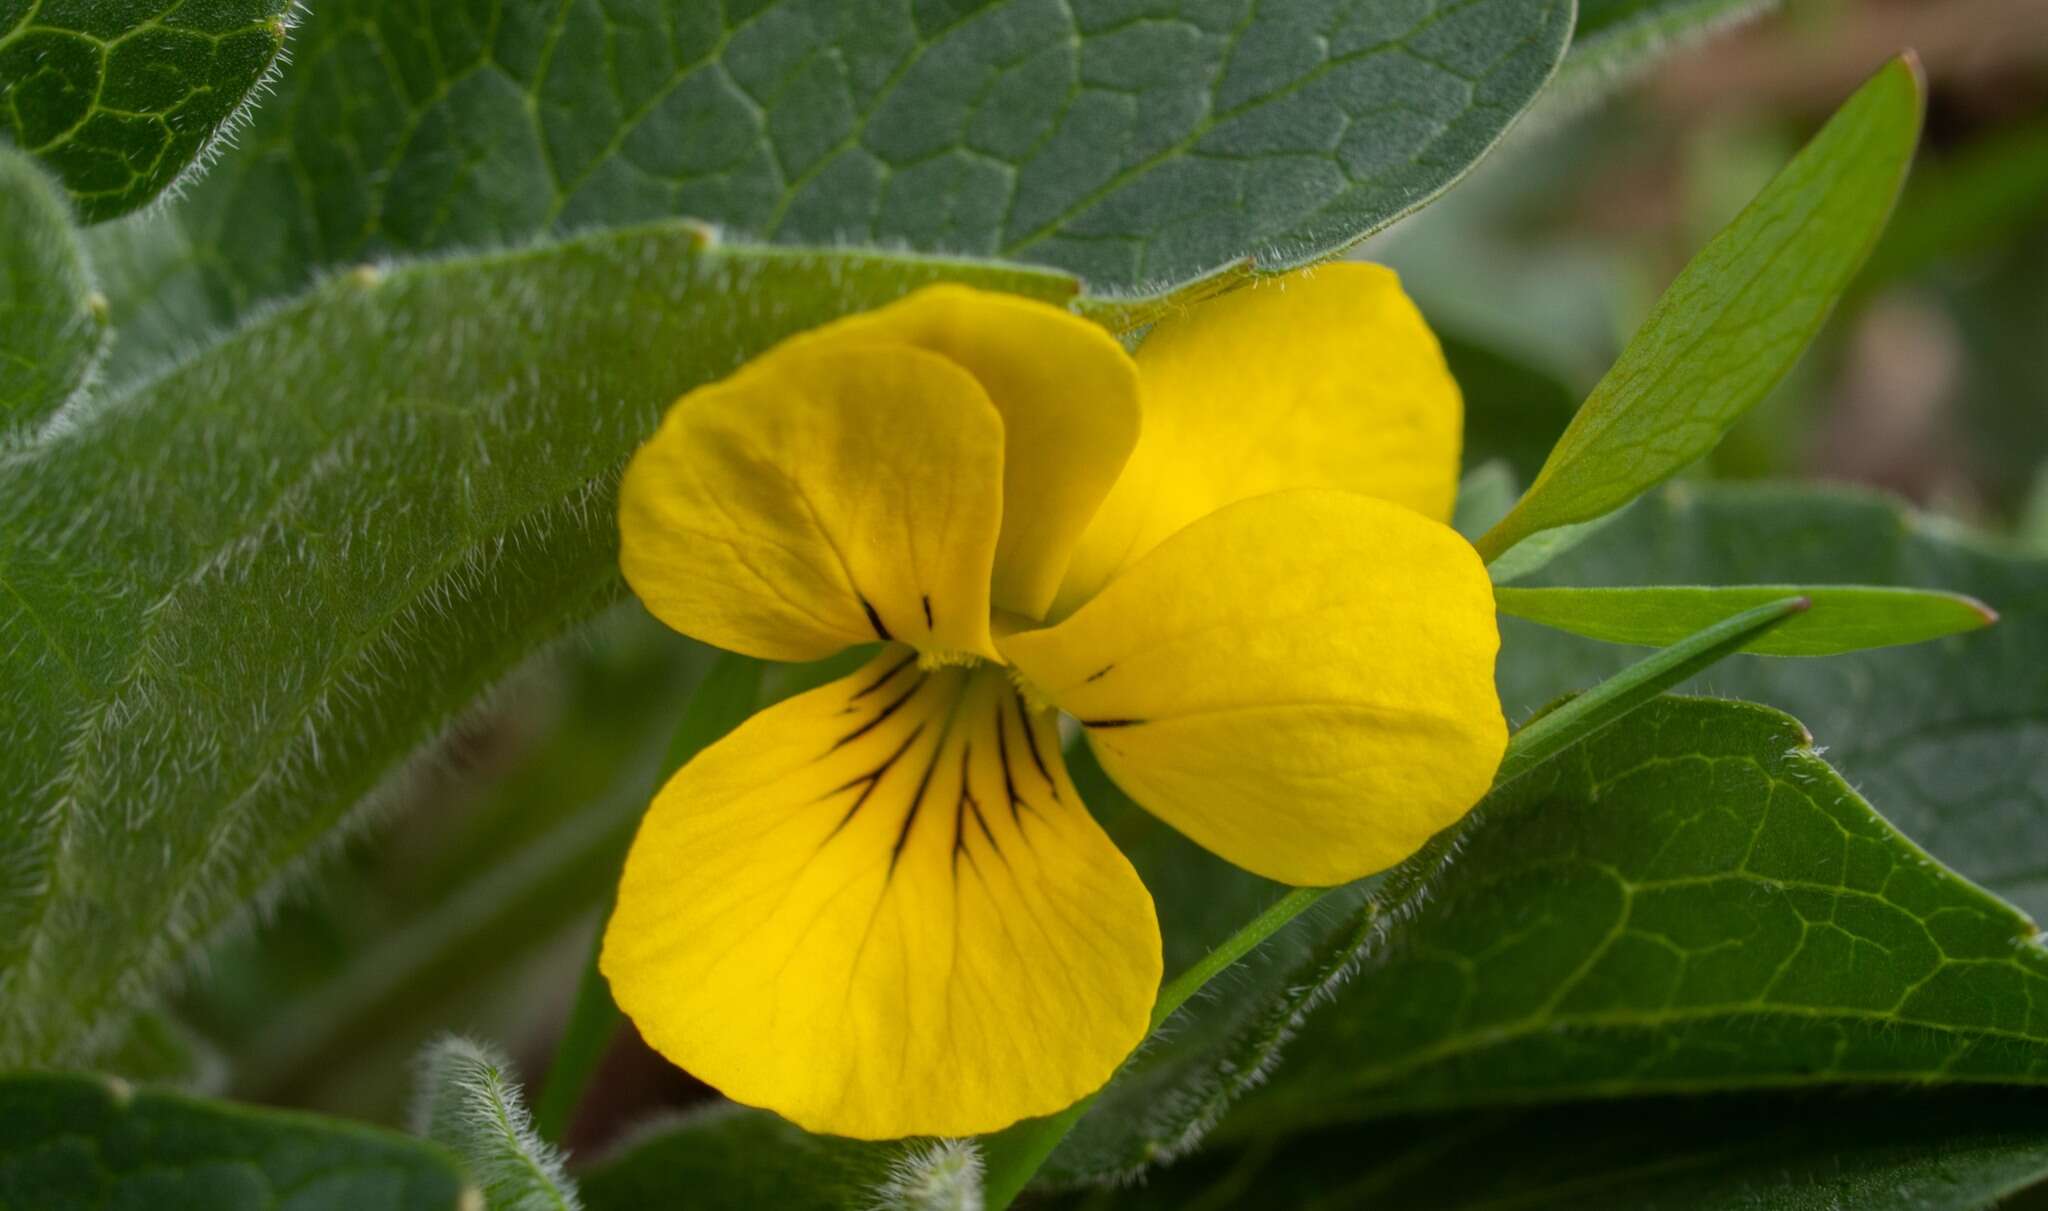 Image of canary violet